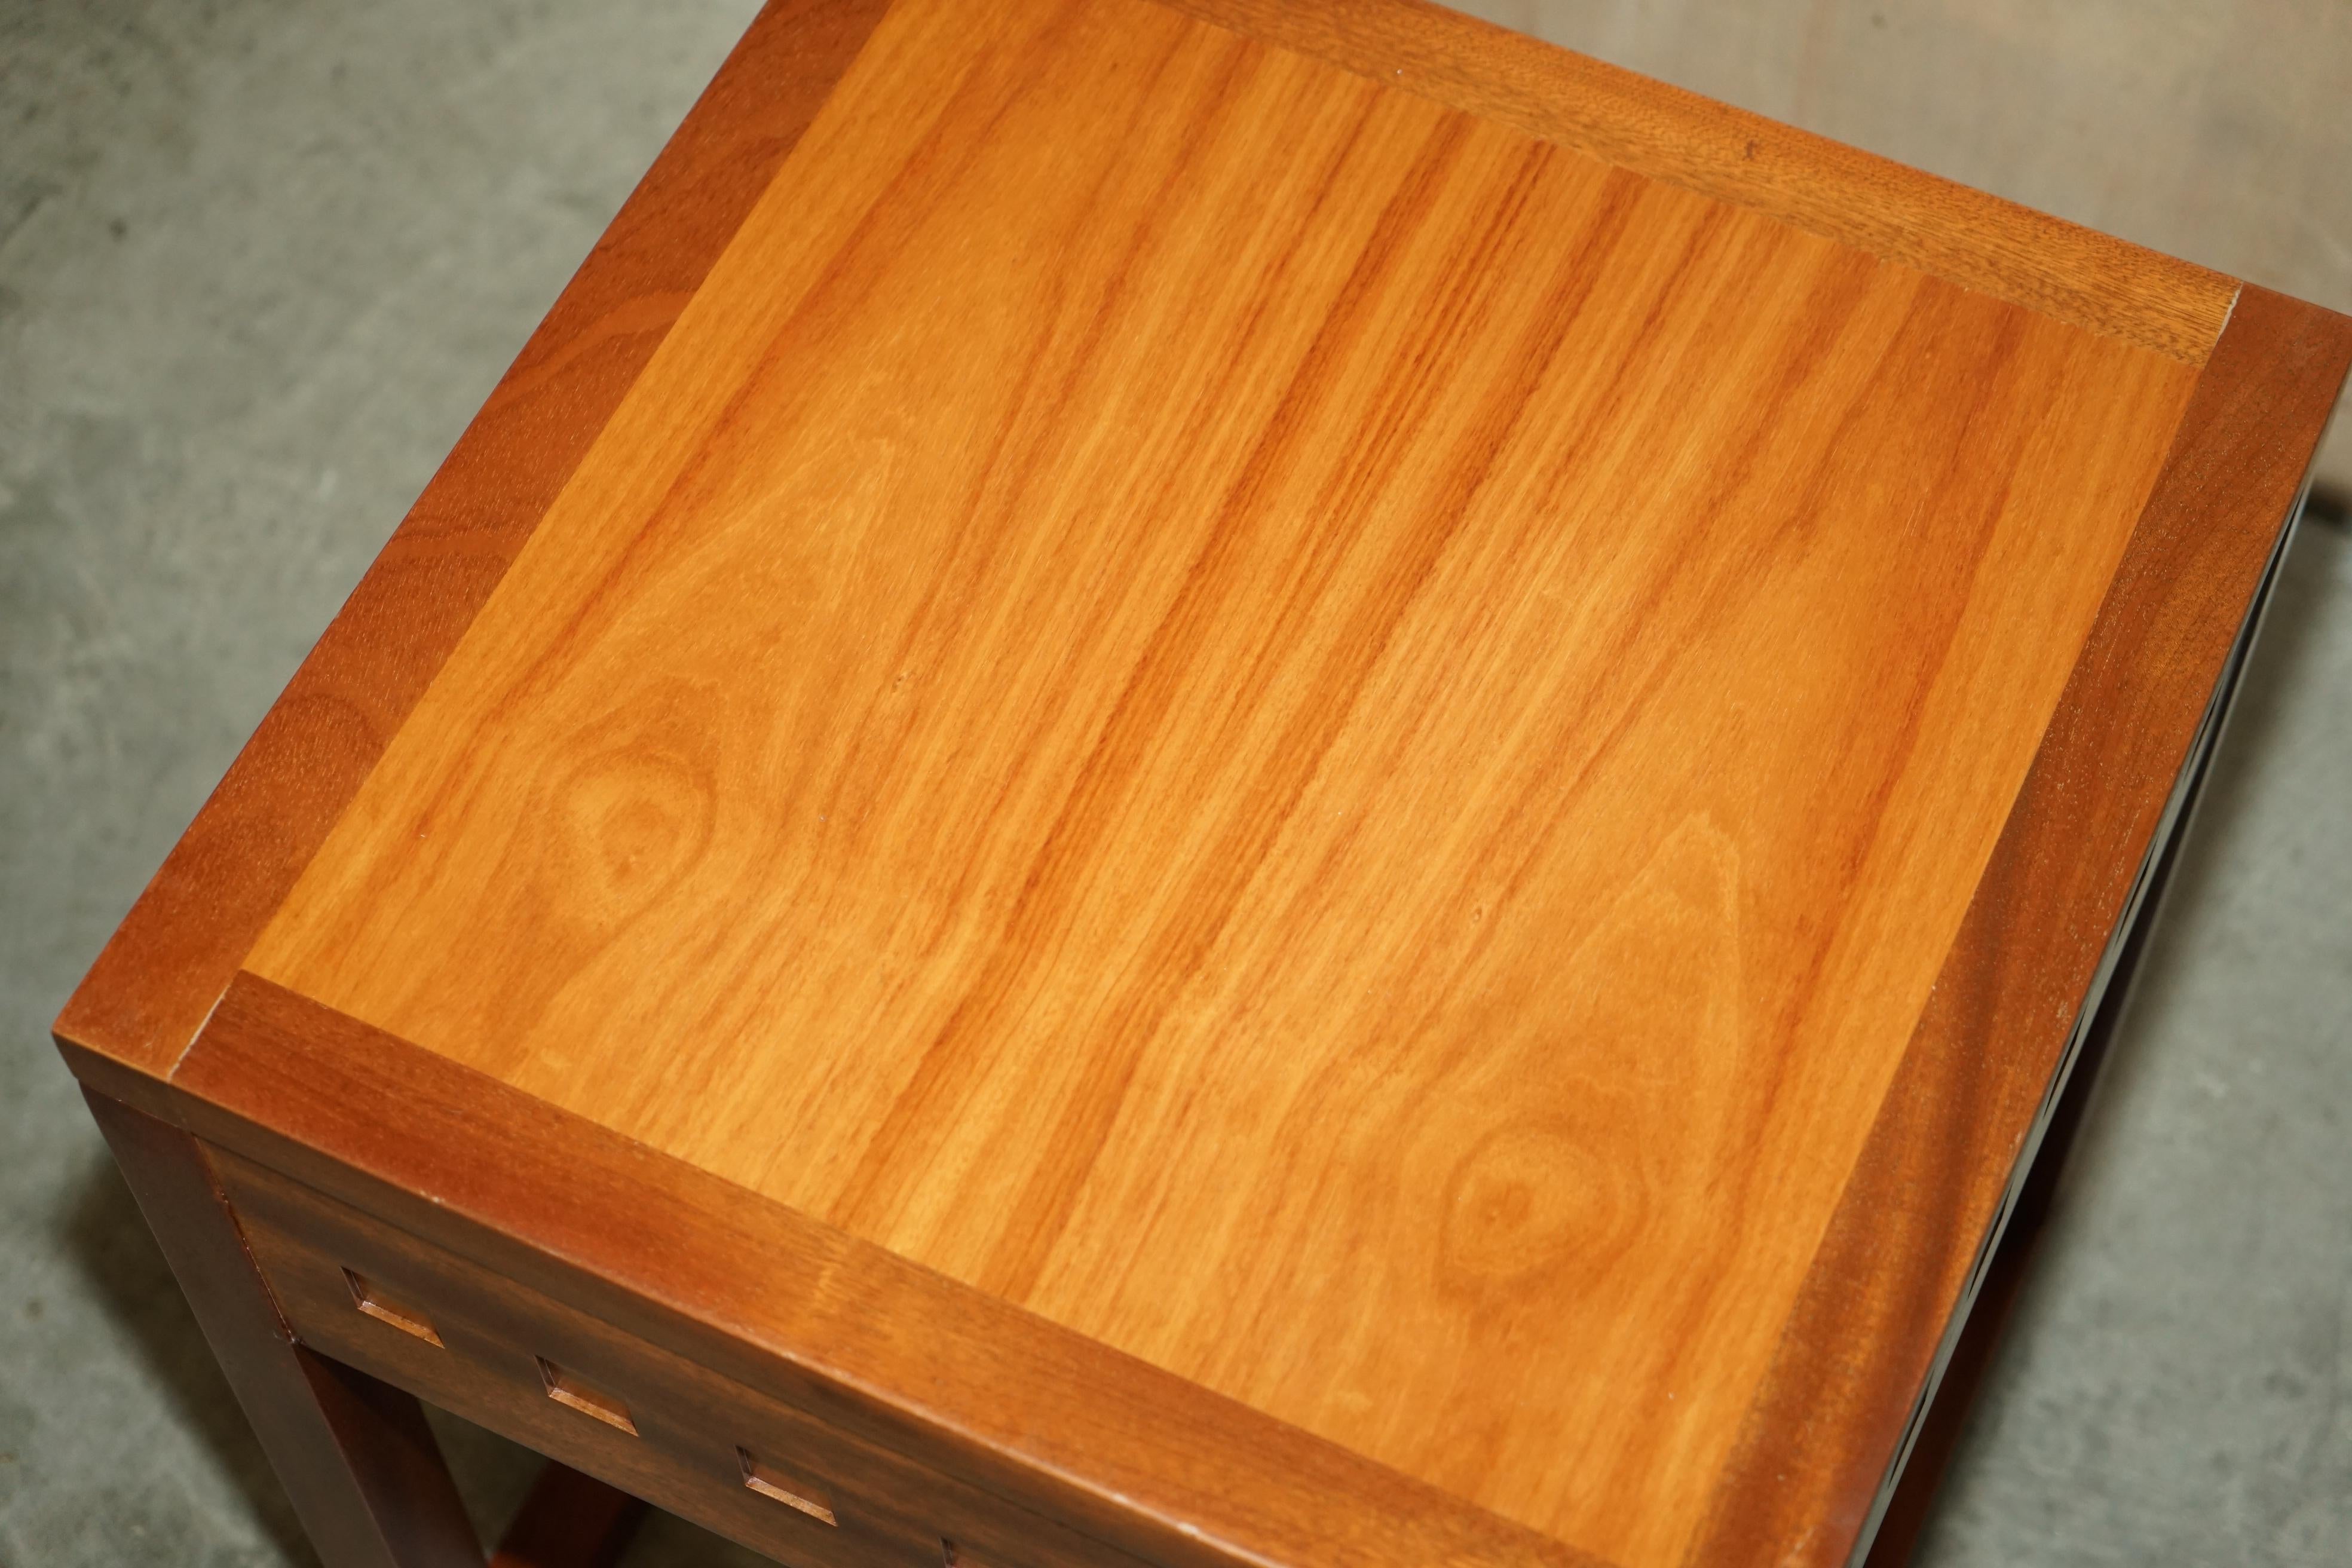 Hand-Crafted Pair of Modern Hand Made Cherry and Teak Wood Side Tables x 4 Available in Total For Sale